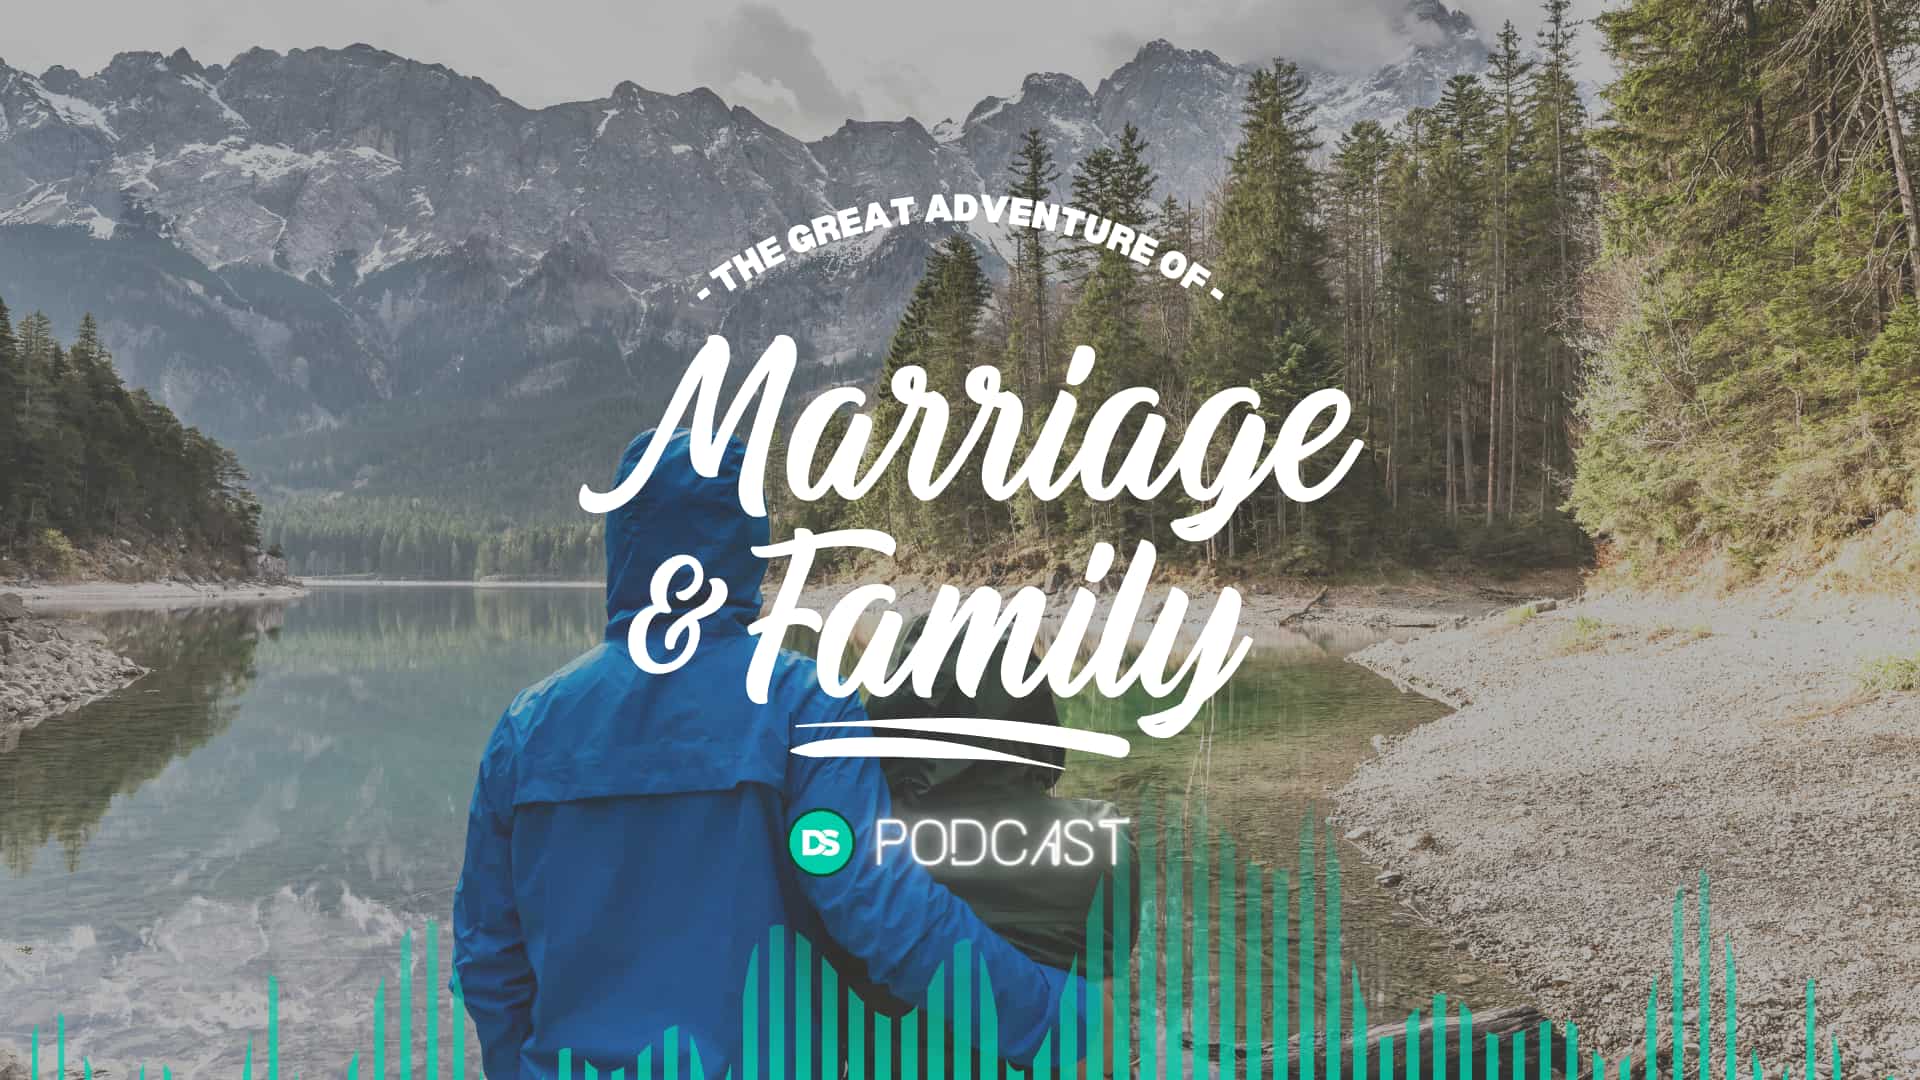 The Great Adventure of Marriage and Family 5